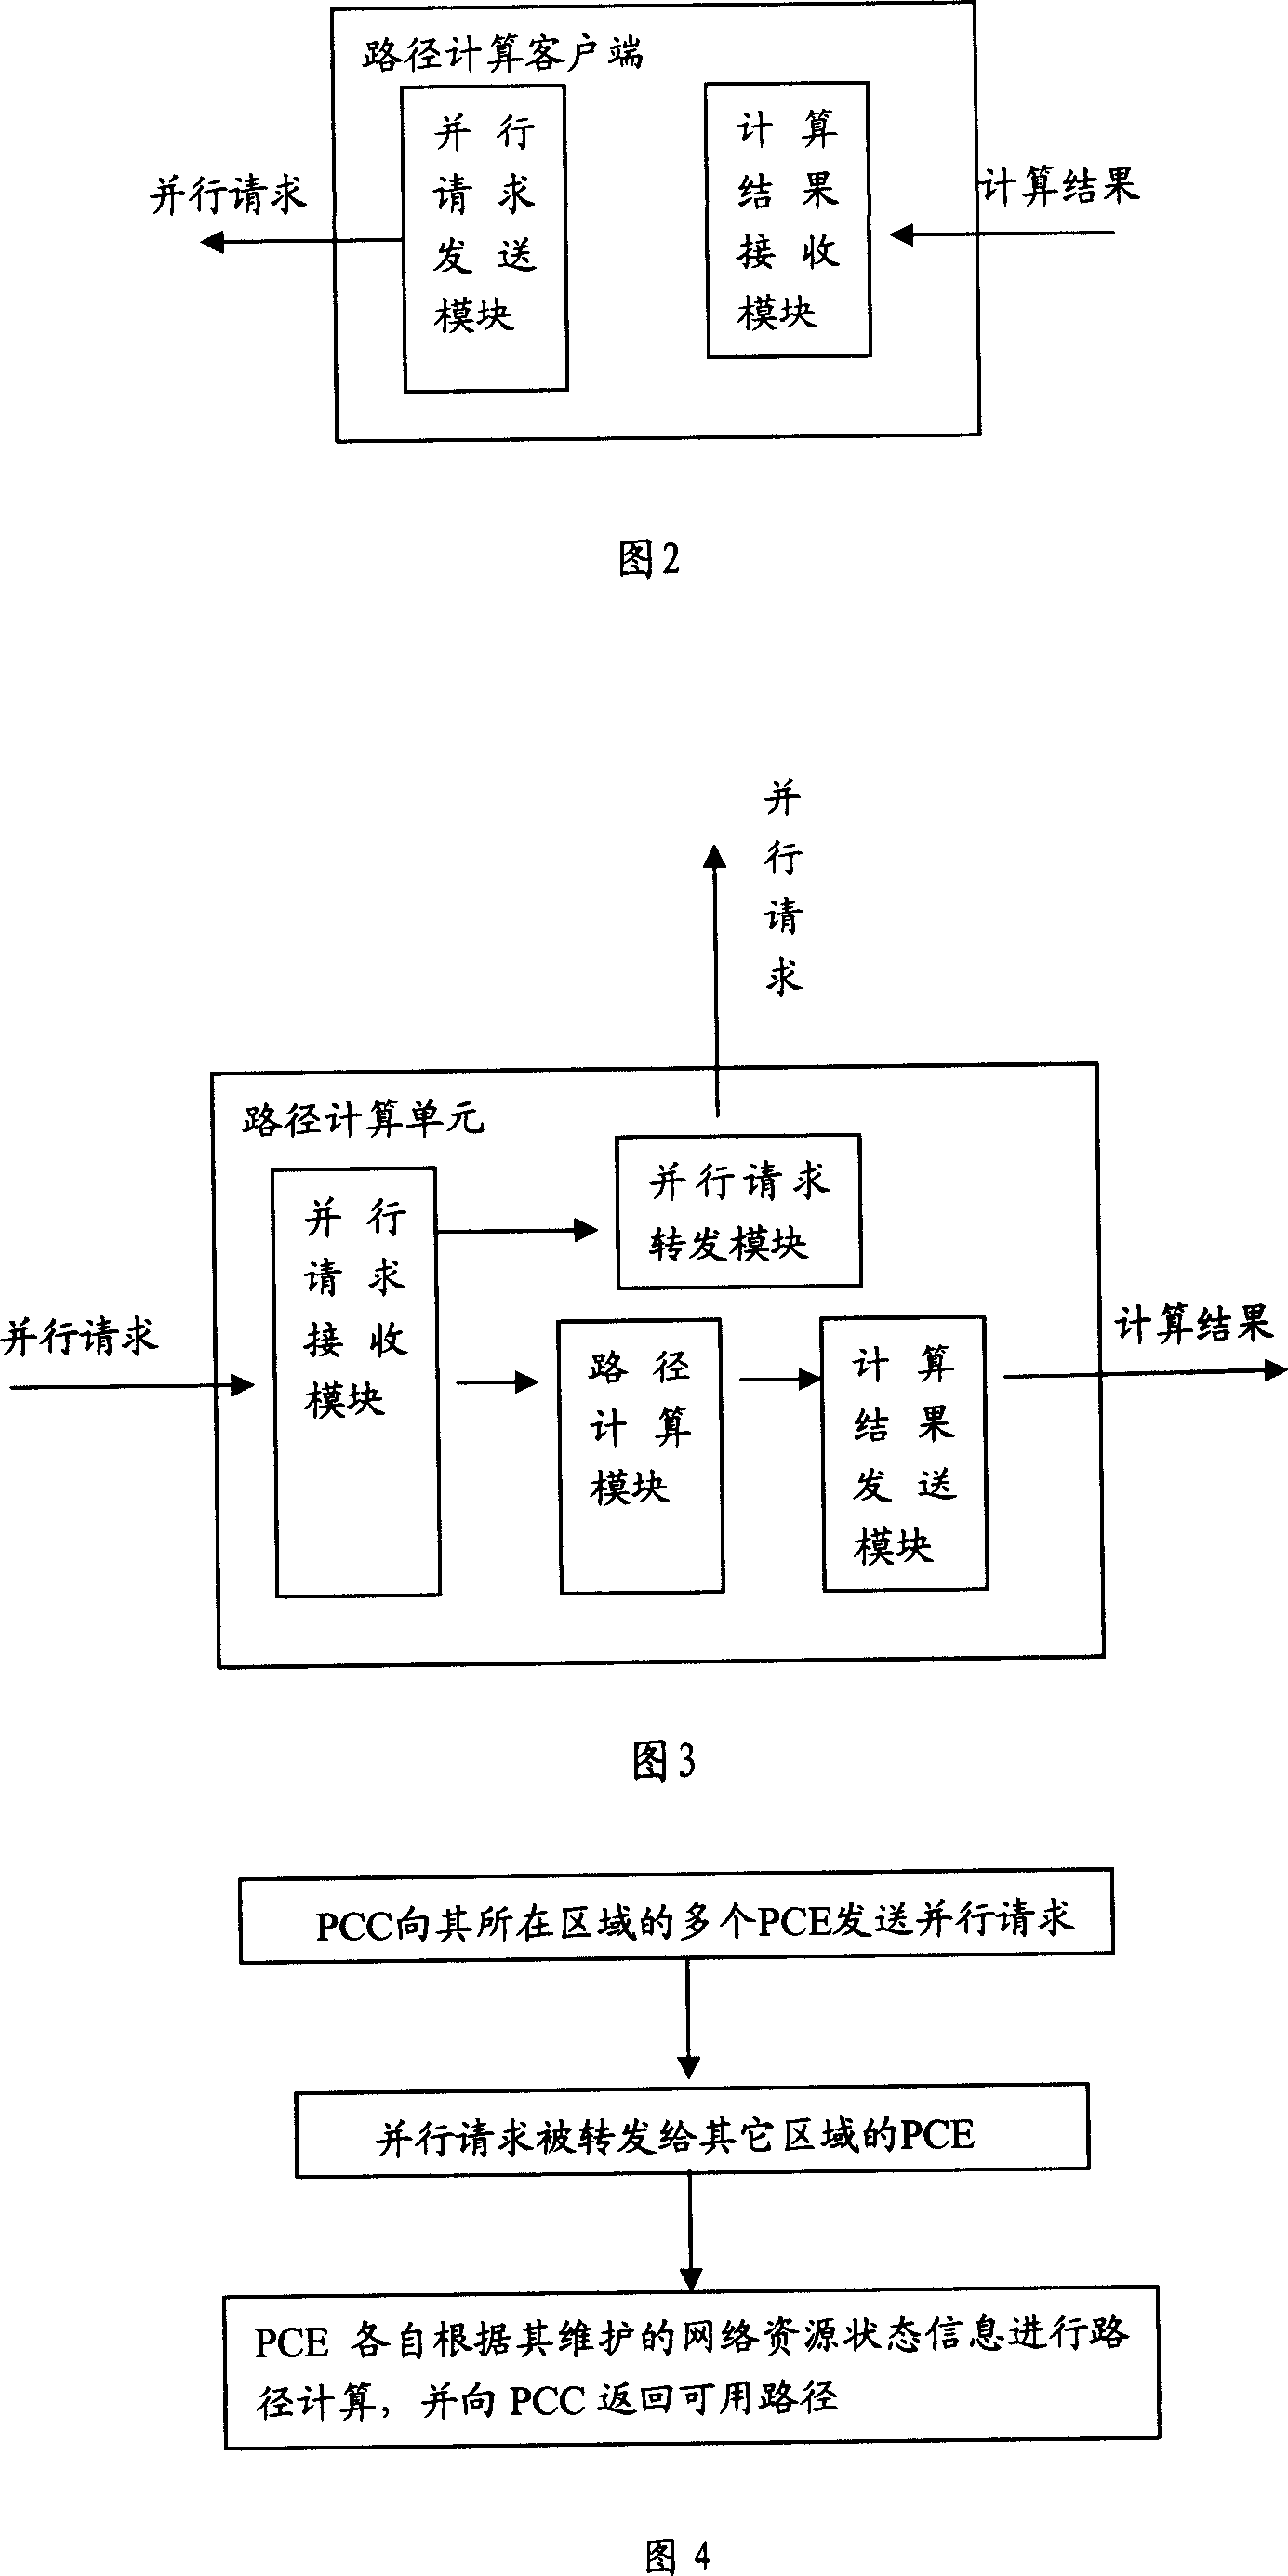 Flow engineering full network counting method and system between regions